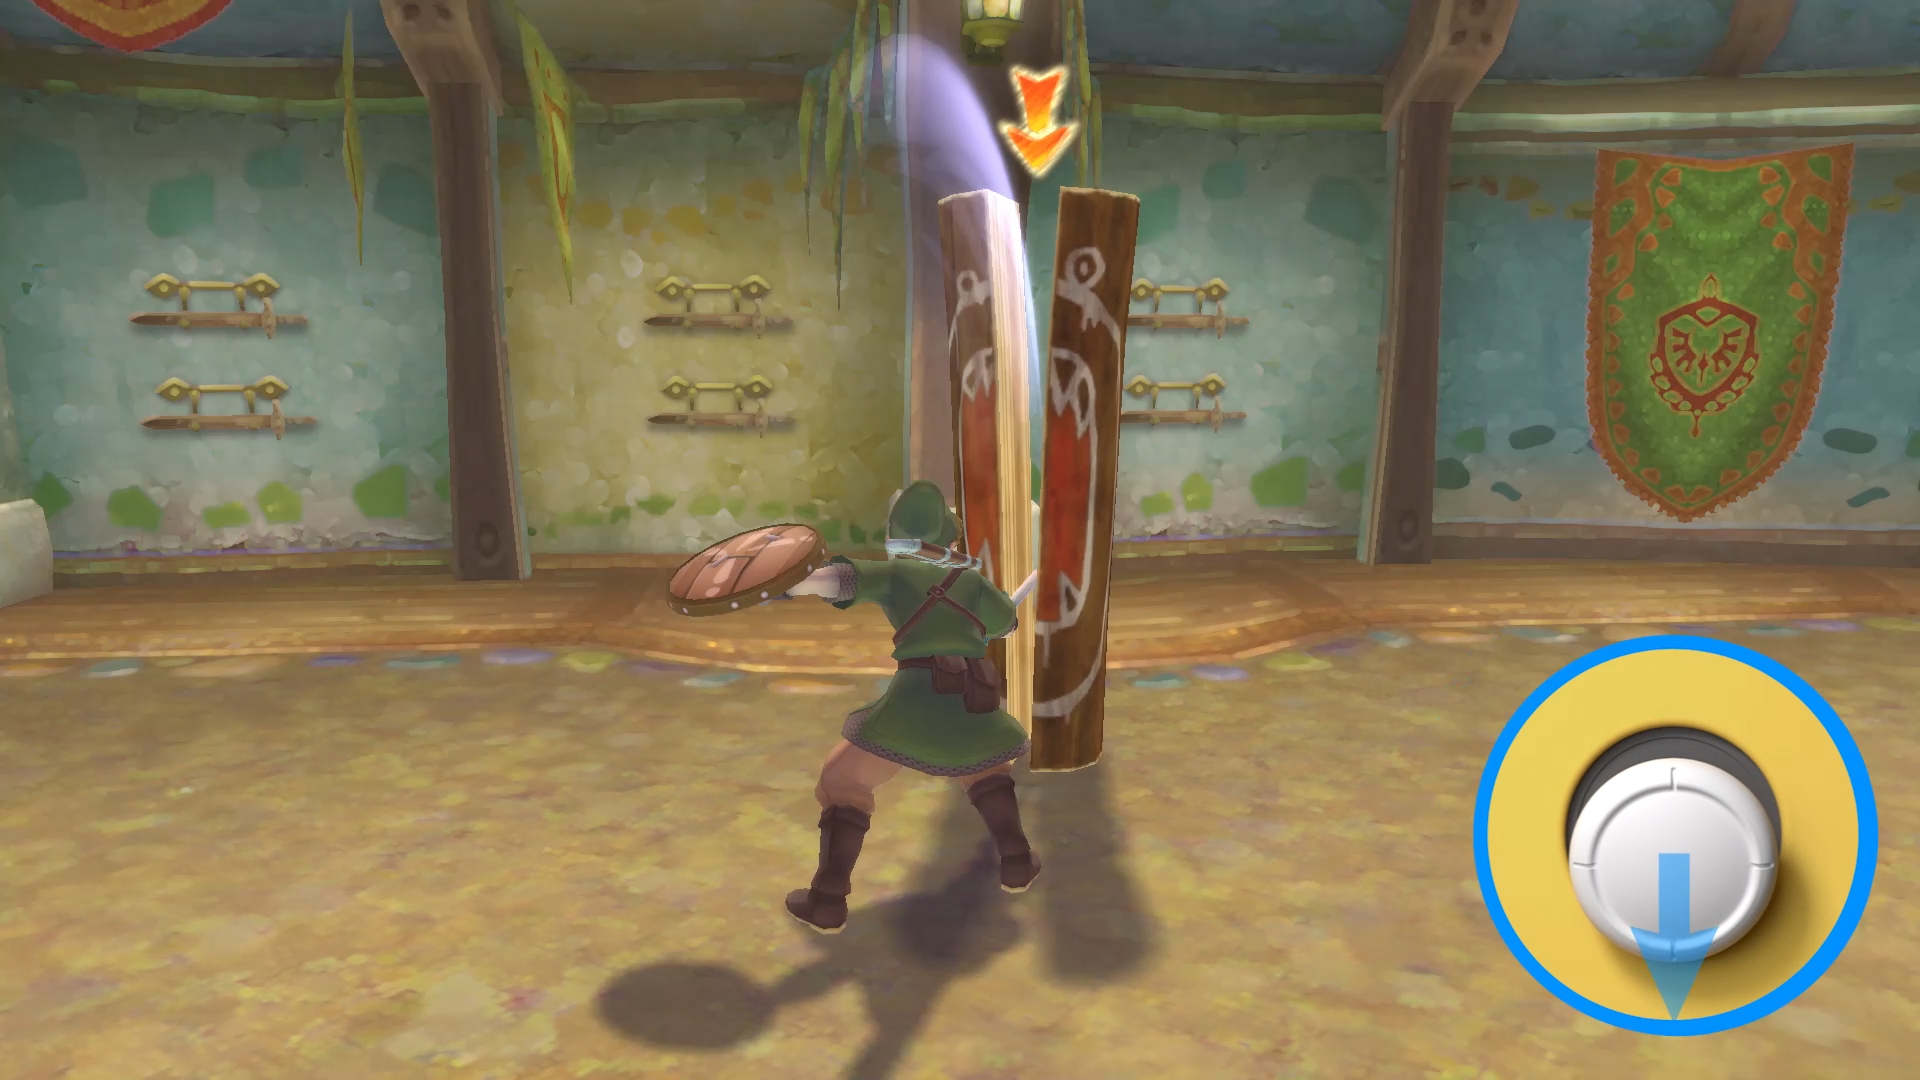 Link slashes his sword down through a log, while the screen shows the button prompt needed 